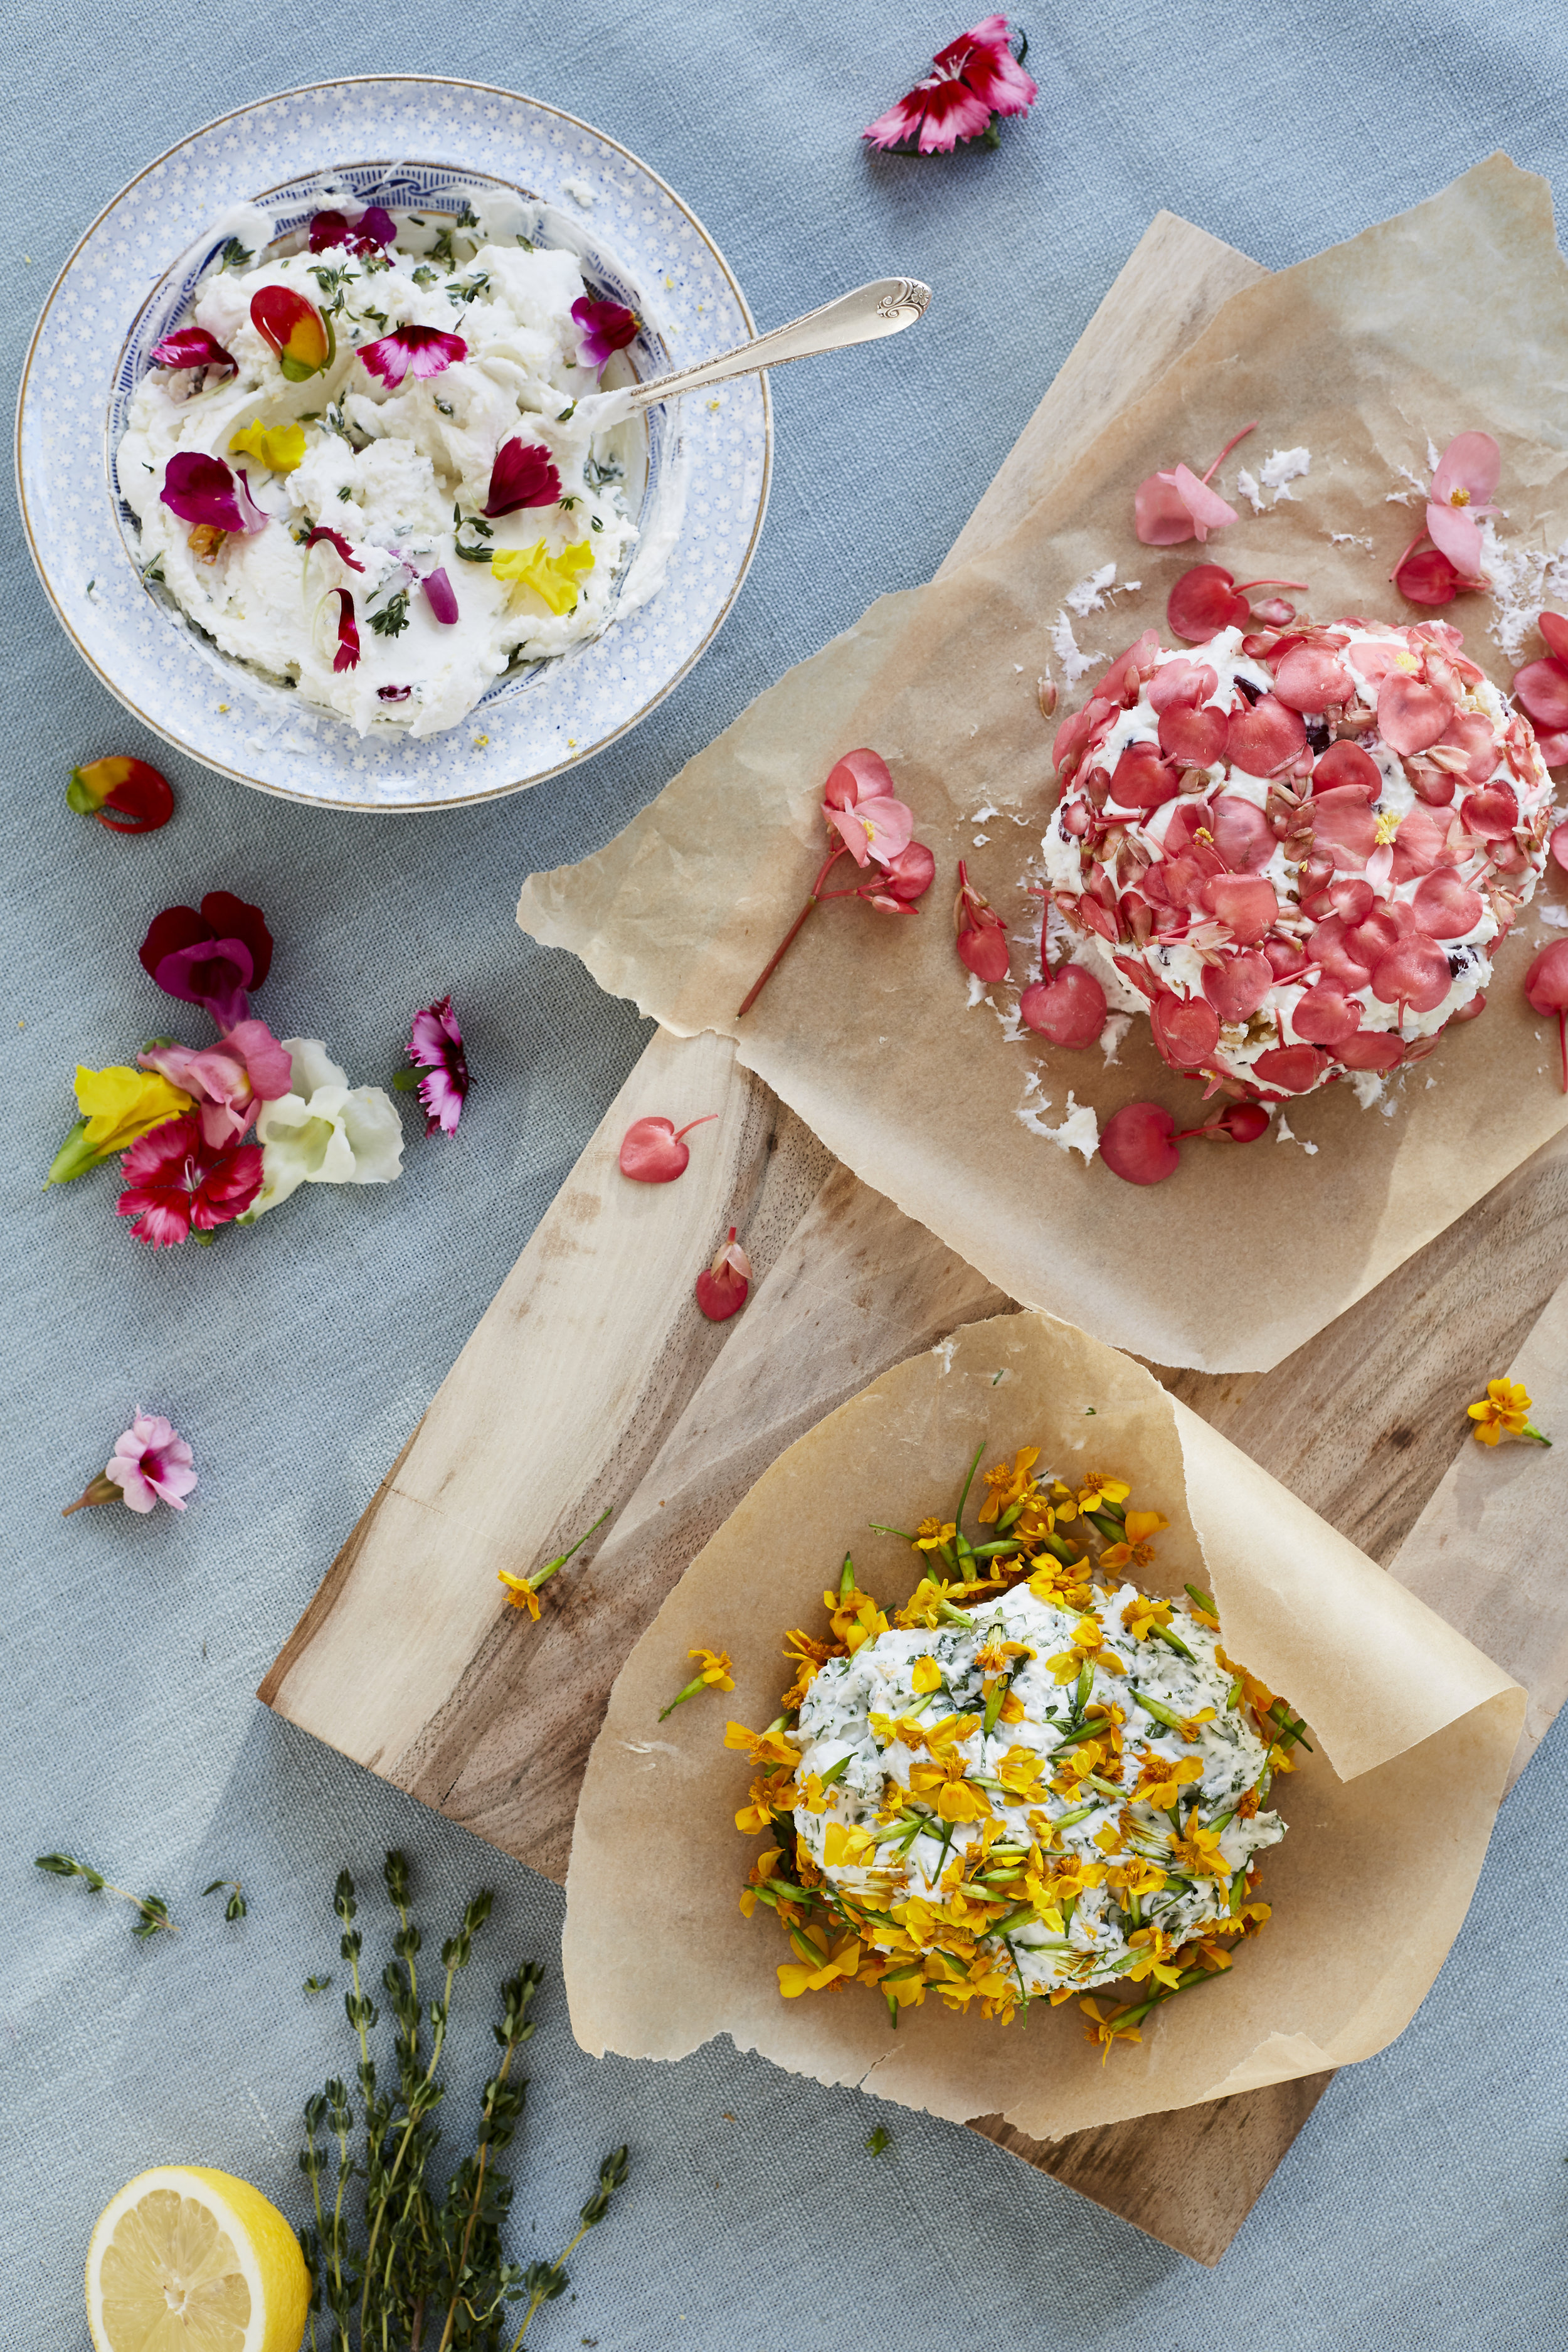 ideas for using Edible flowers as featured in 91 Magazine